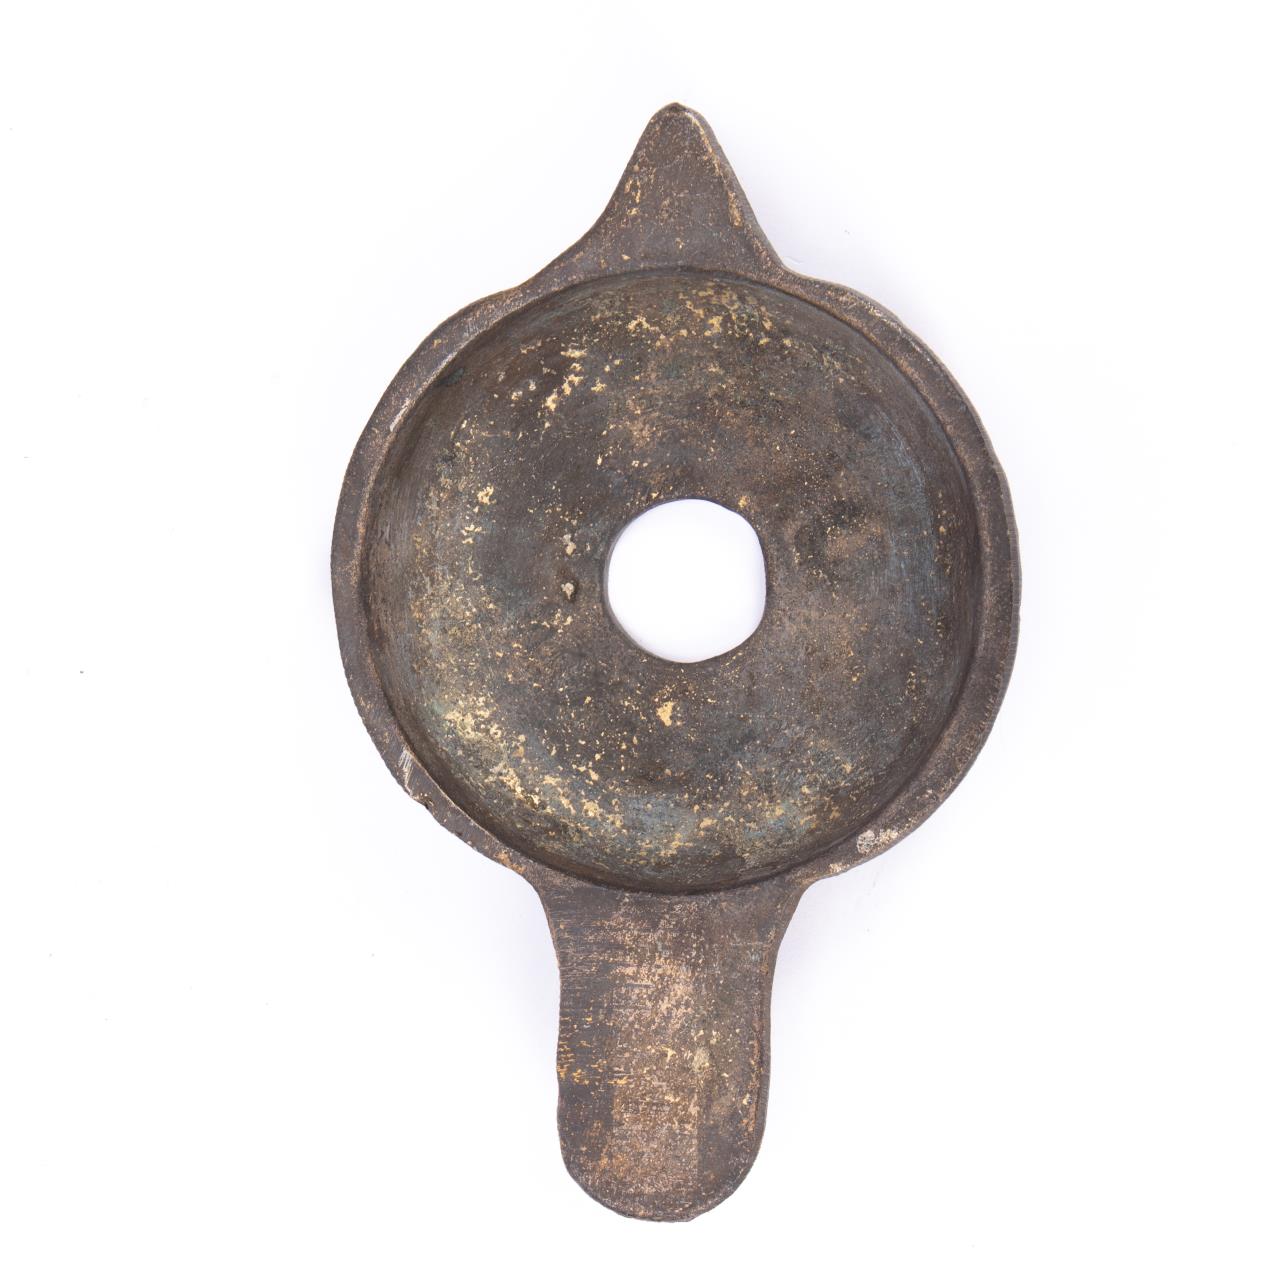 CHINESE ARCHAIC STYLE BRONZE ARTICLE 35d81b